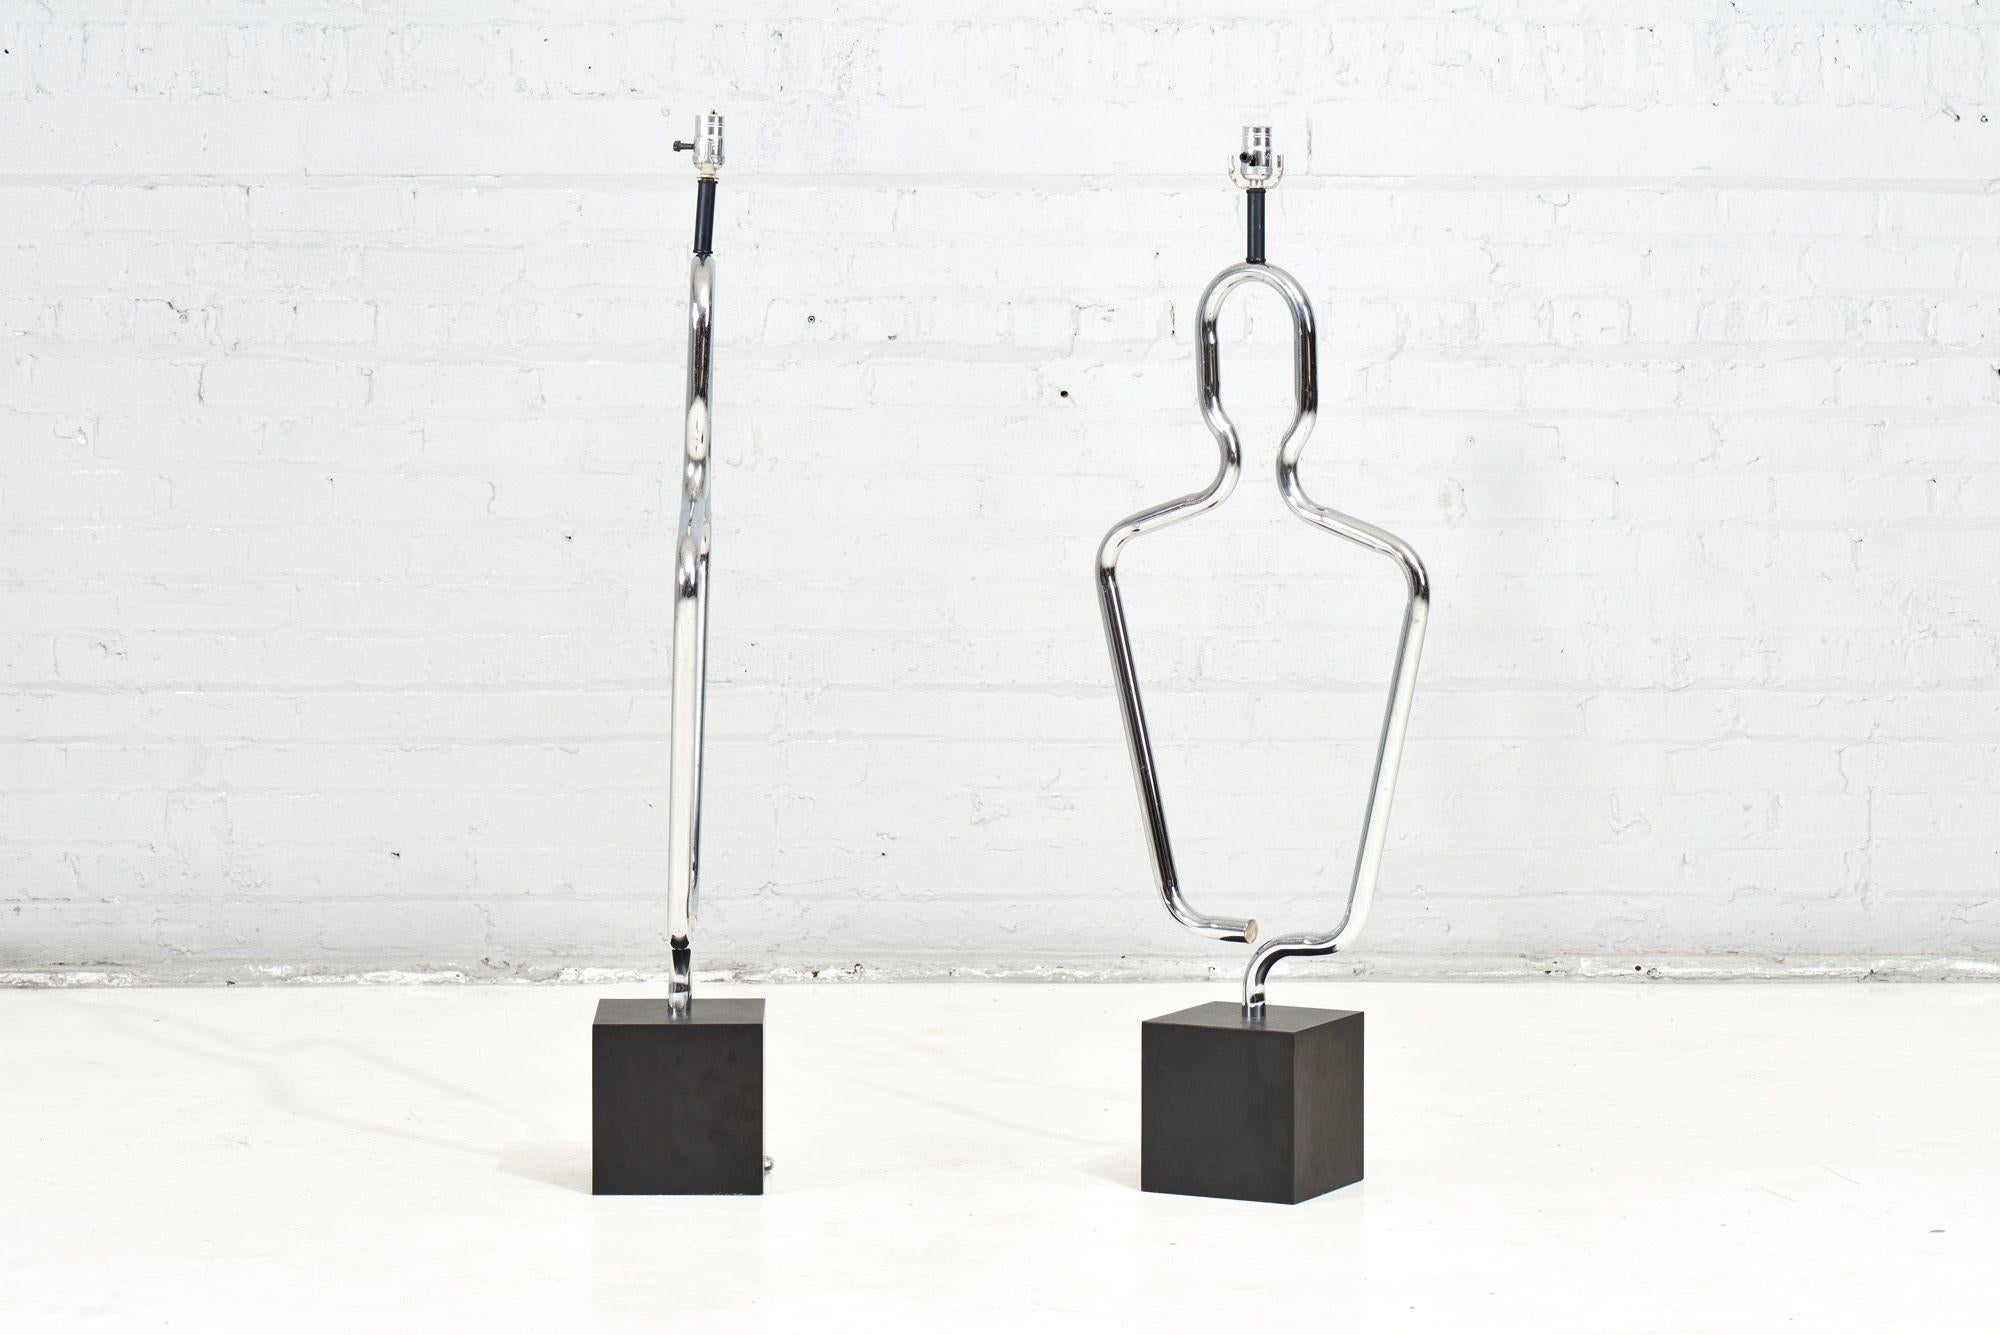 American Pair Sculptural Human Figure Chrome Table Lamps, 1970 For Sale